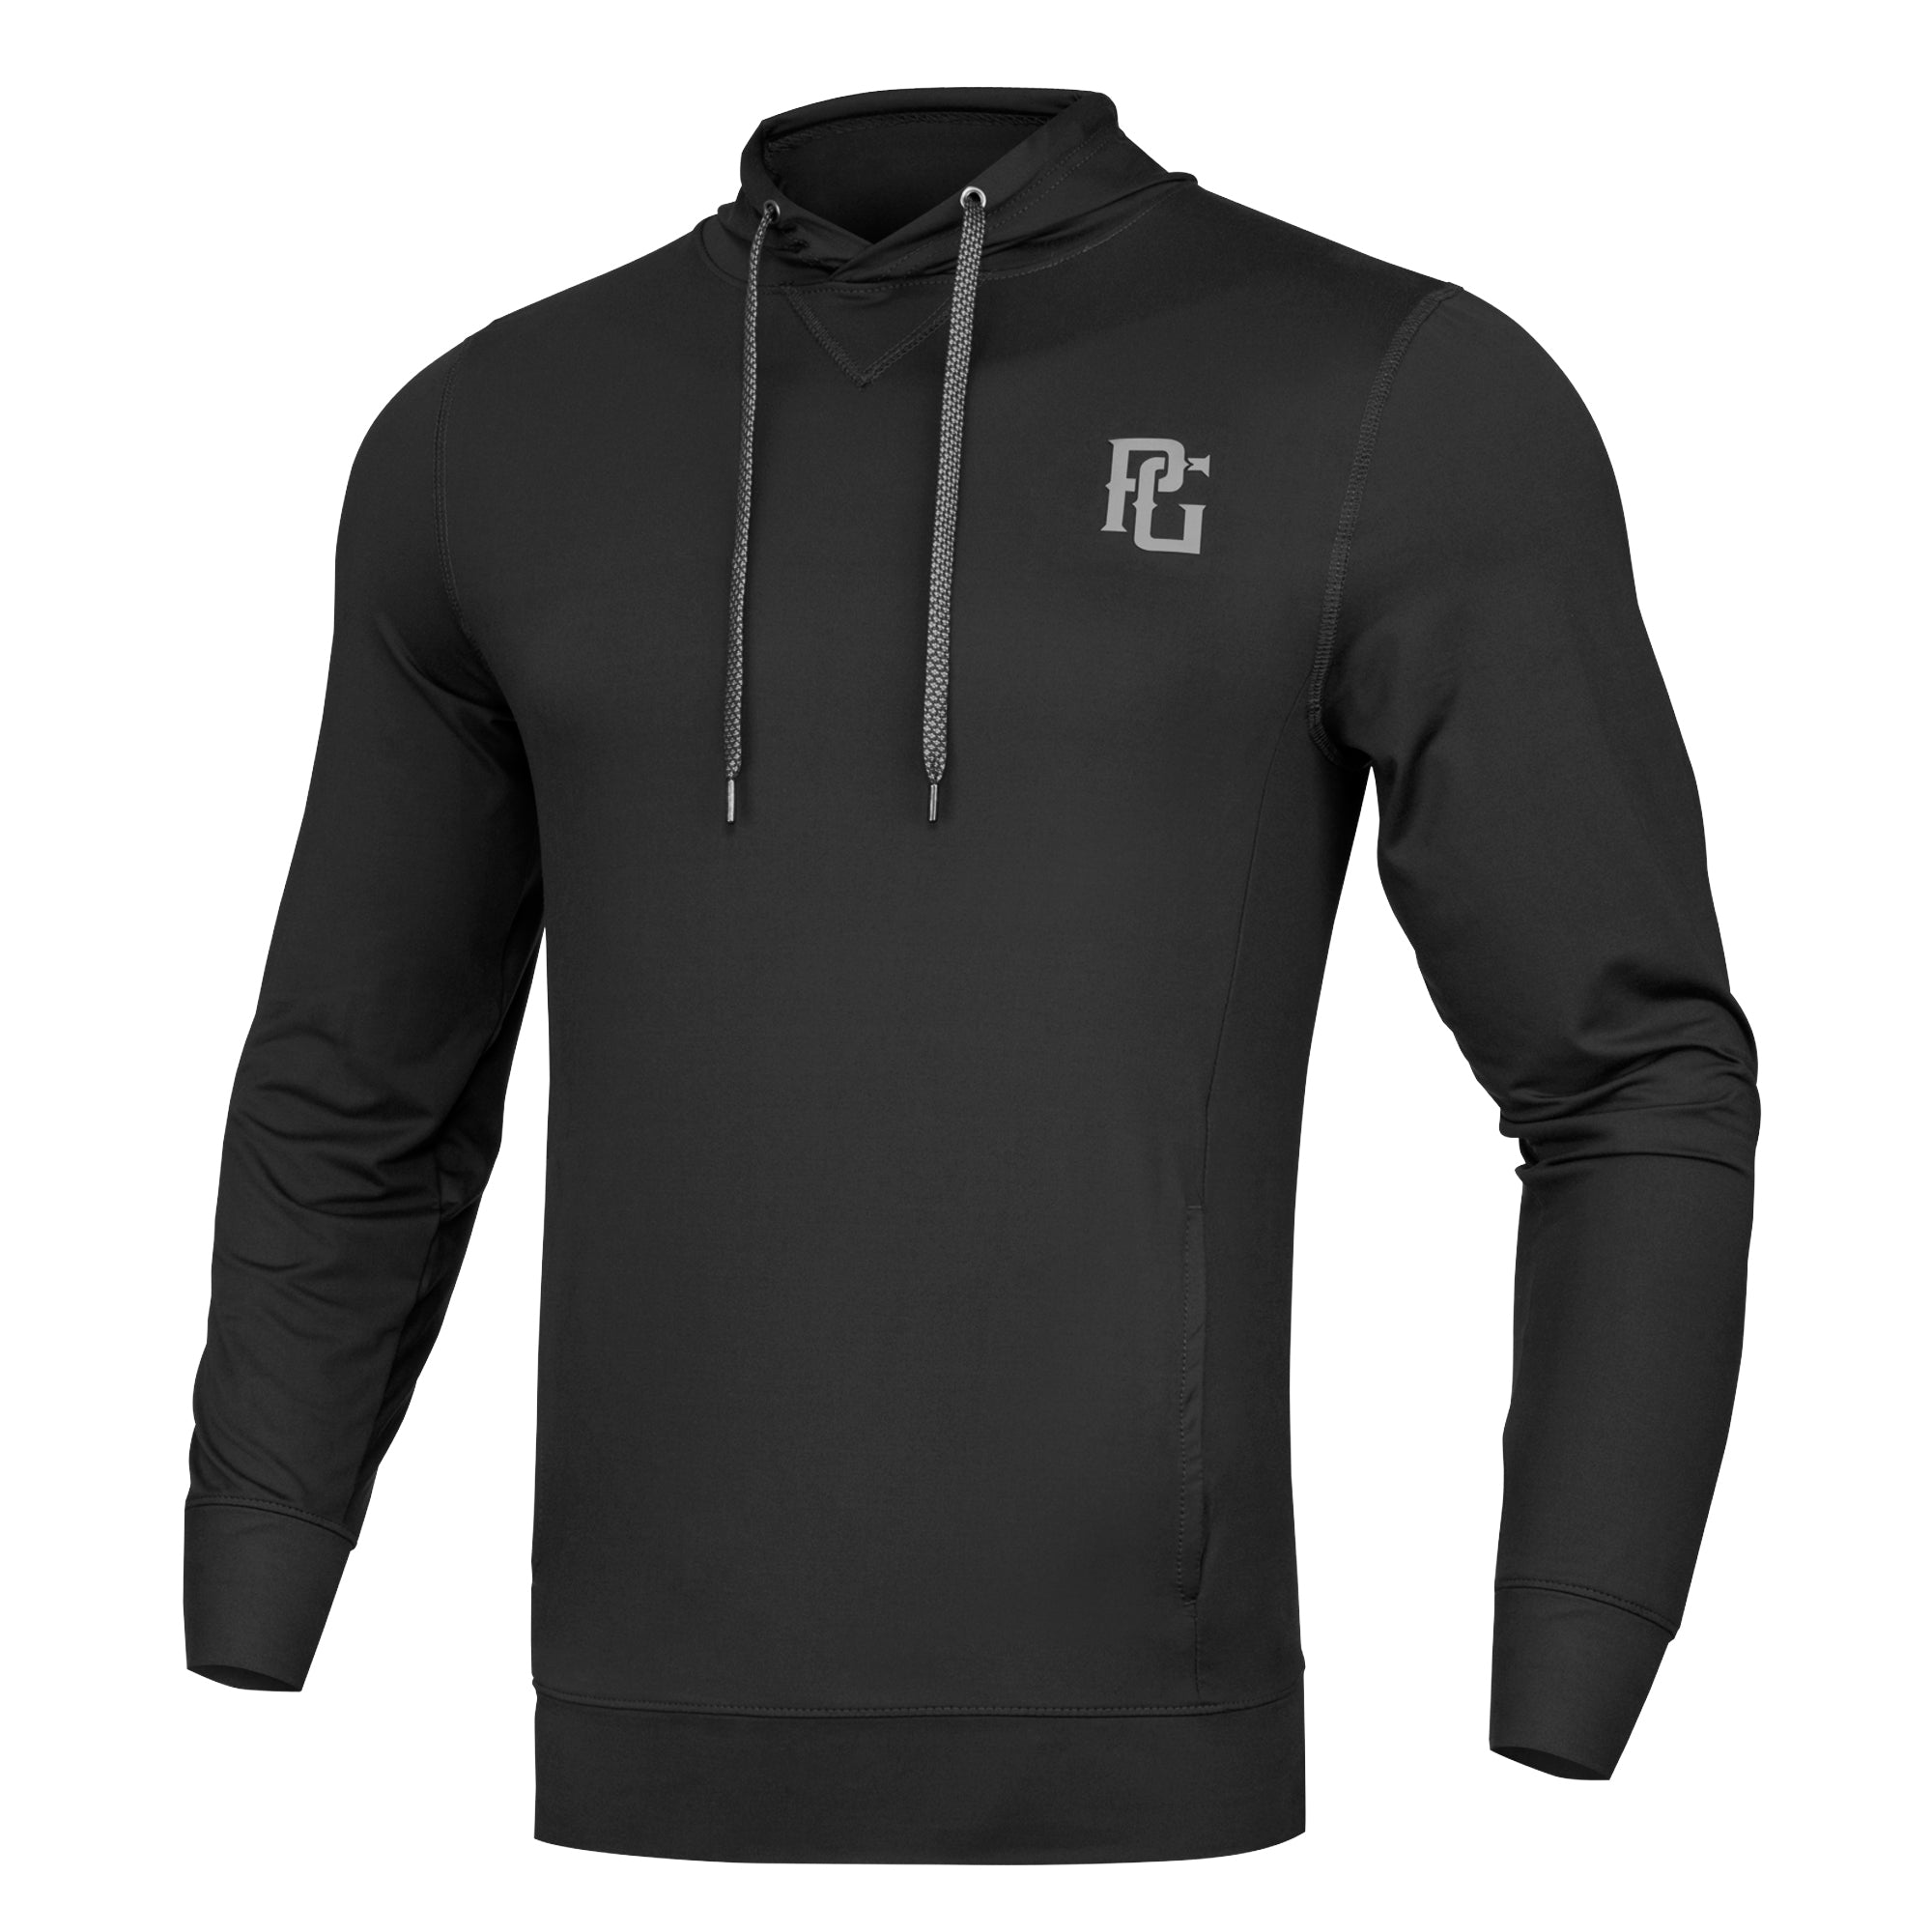 Rockford Soft Knit Hoodie– Perfect Game Apparel